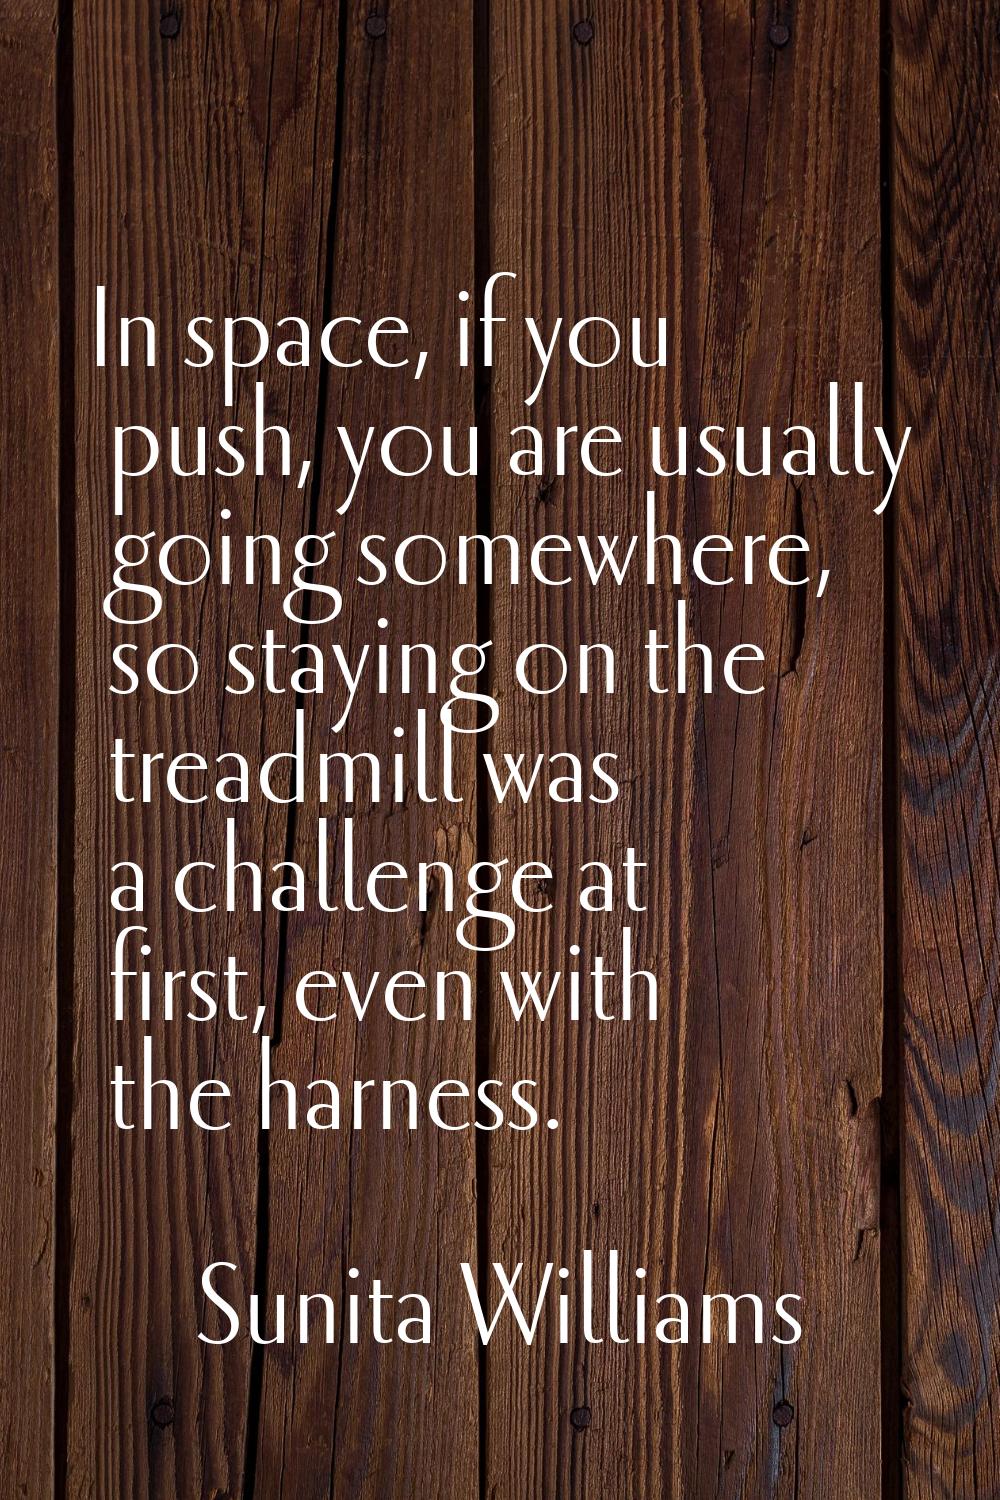 In space, if you push, you are usually going somewhere, so staying on the treadmill was a challenge